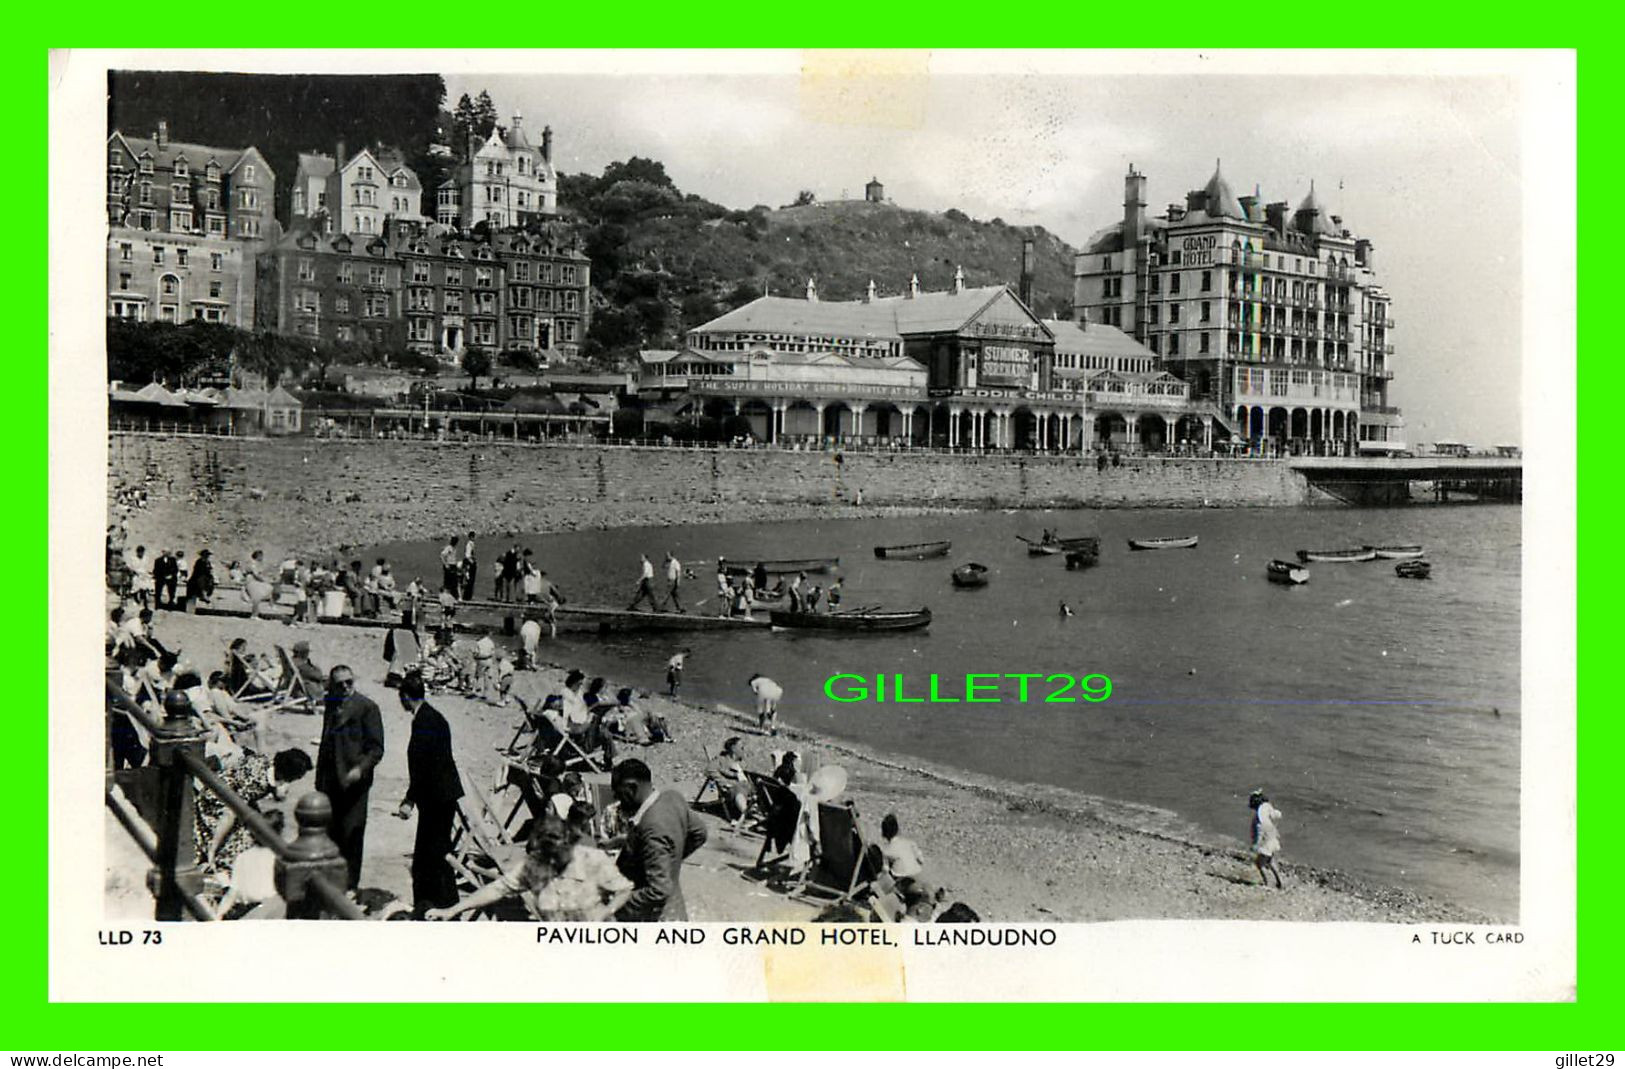 LLANDUDNO, PAYS DE GALLES - PAVILION AND GRAND HOTEL - ANIMATED WITH PEOPLES - TRAVEL IN 1953 - RAPHAEL TUCK - - Caernarvonshire